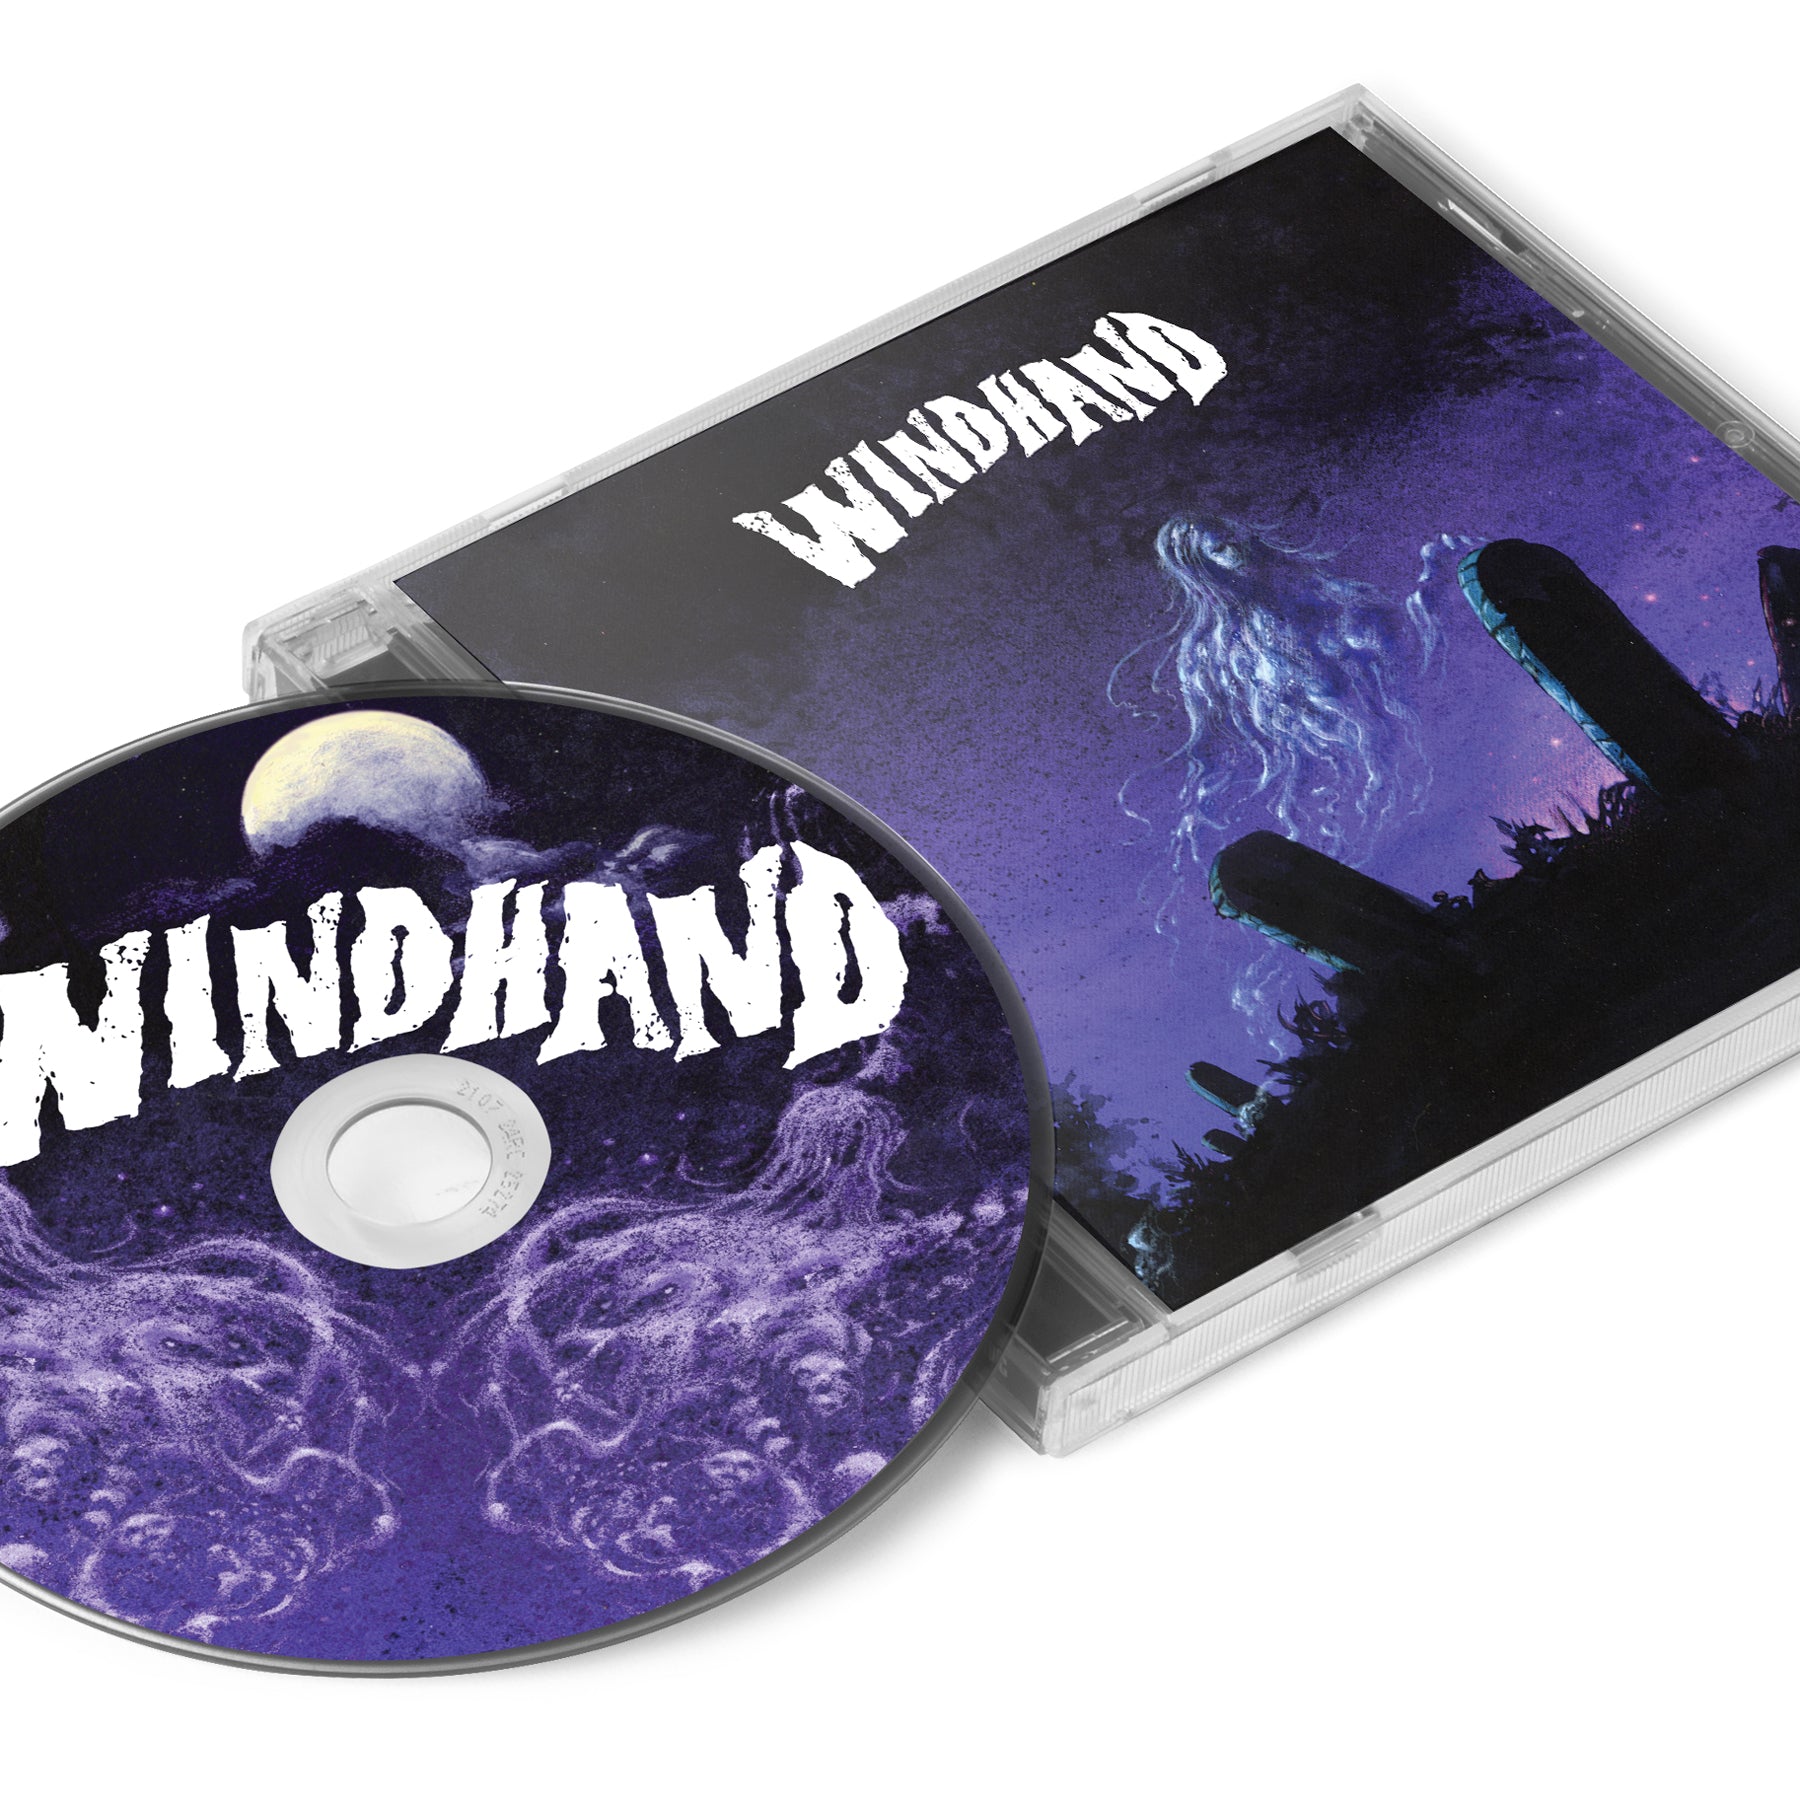 Windhand "Windhand (Reissue) " CD